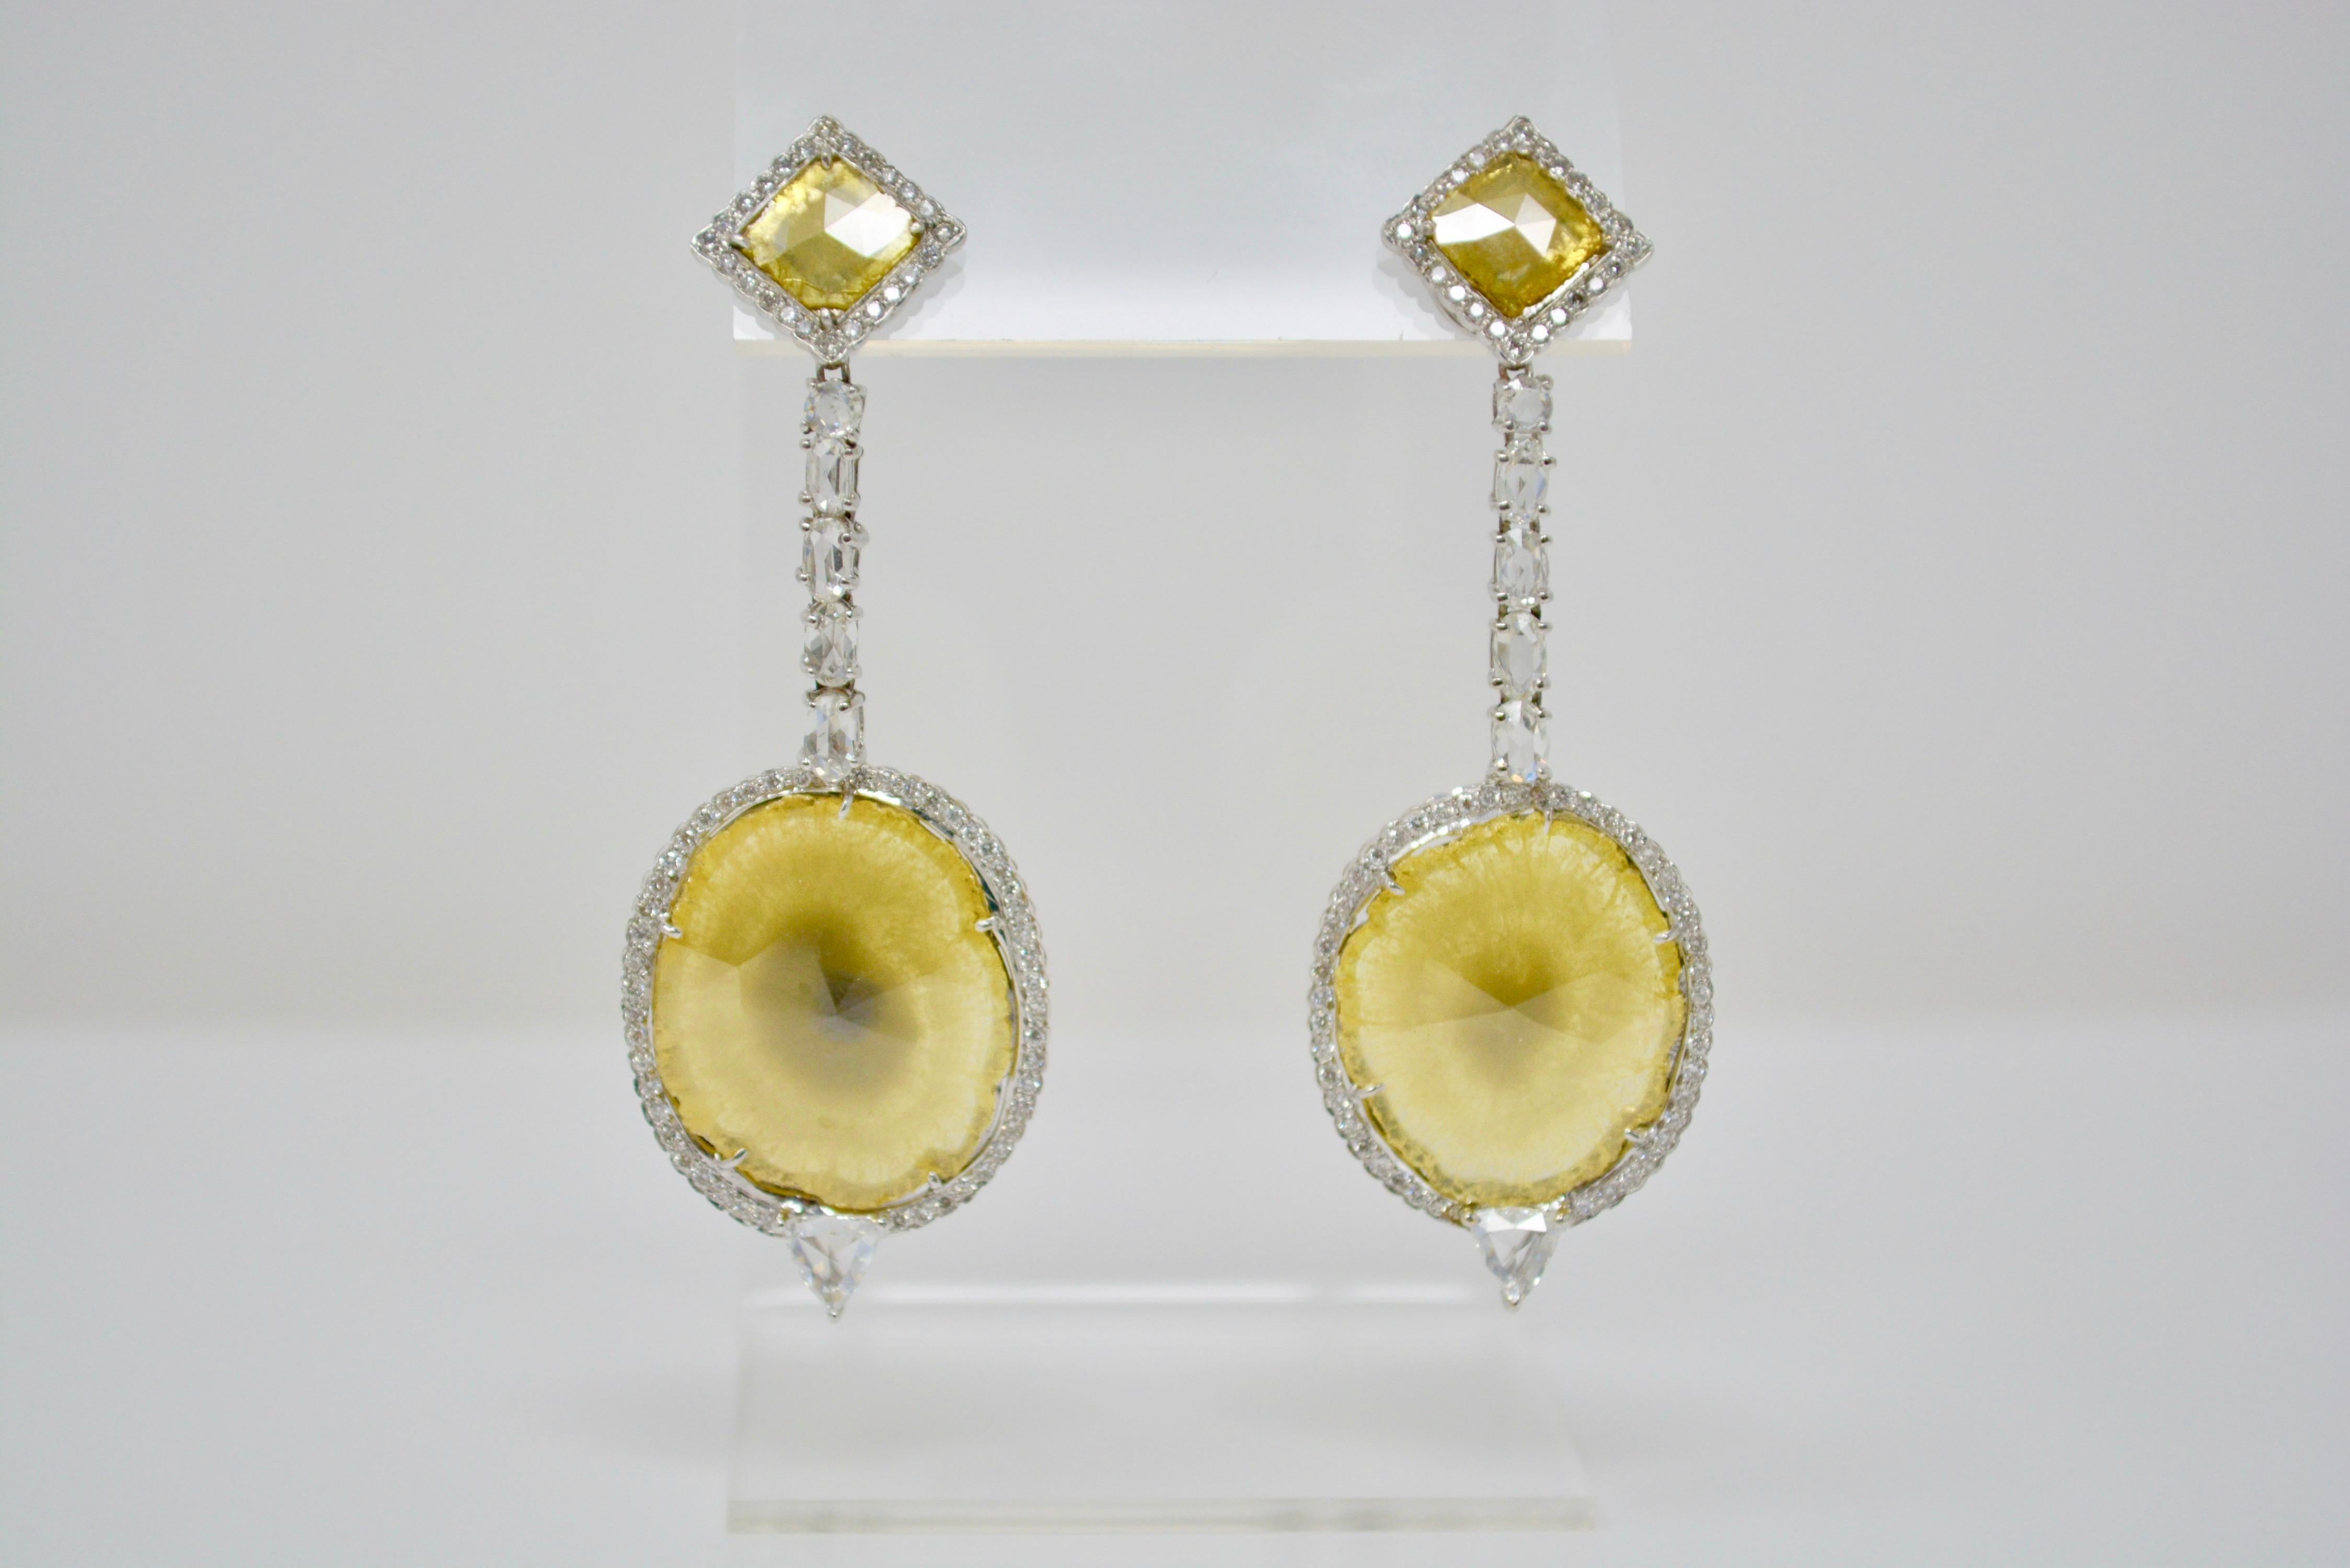 These magnificent and classy pair of natural yellow slice diamond earrings are set with a total of 13.09 carat of natural yellow slice diamonds and 5 carat of natural white diamonds with VS clarity. These are beautifully designed in 18k white gold.